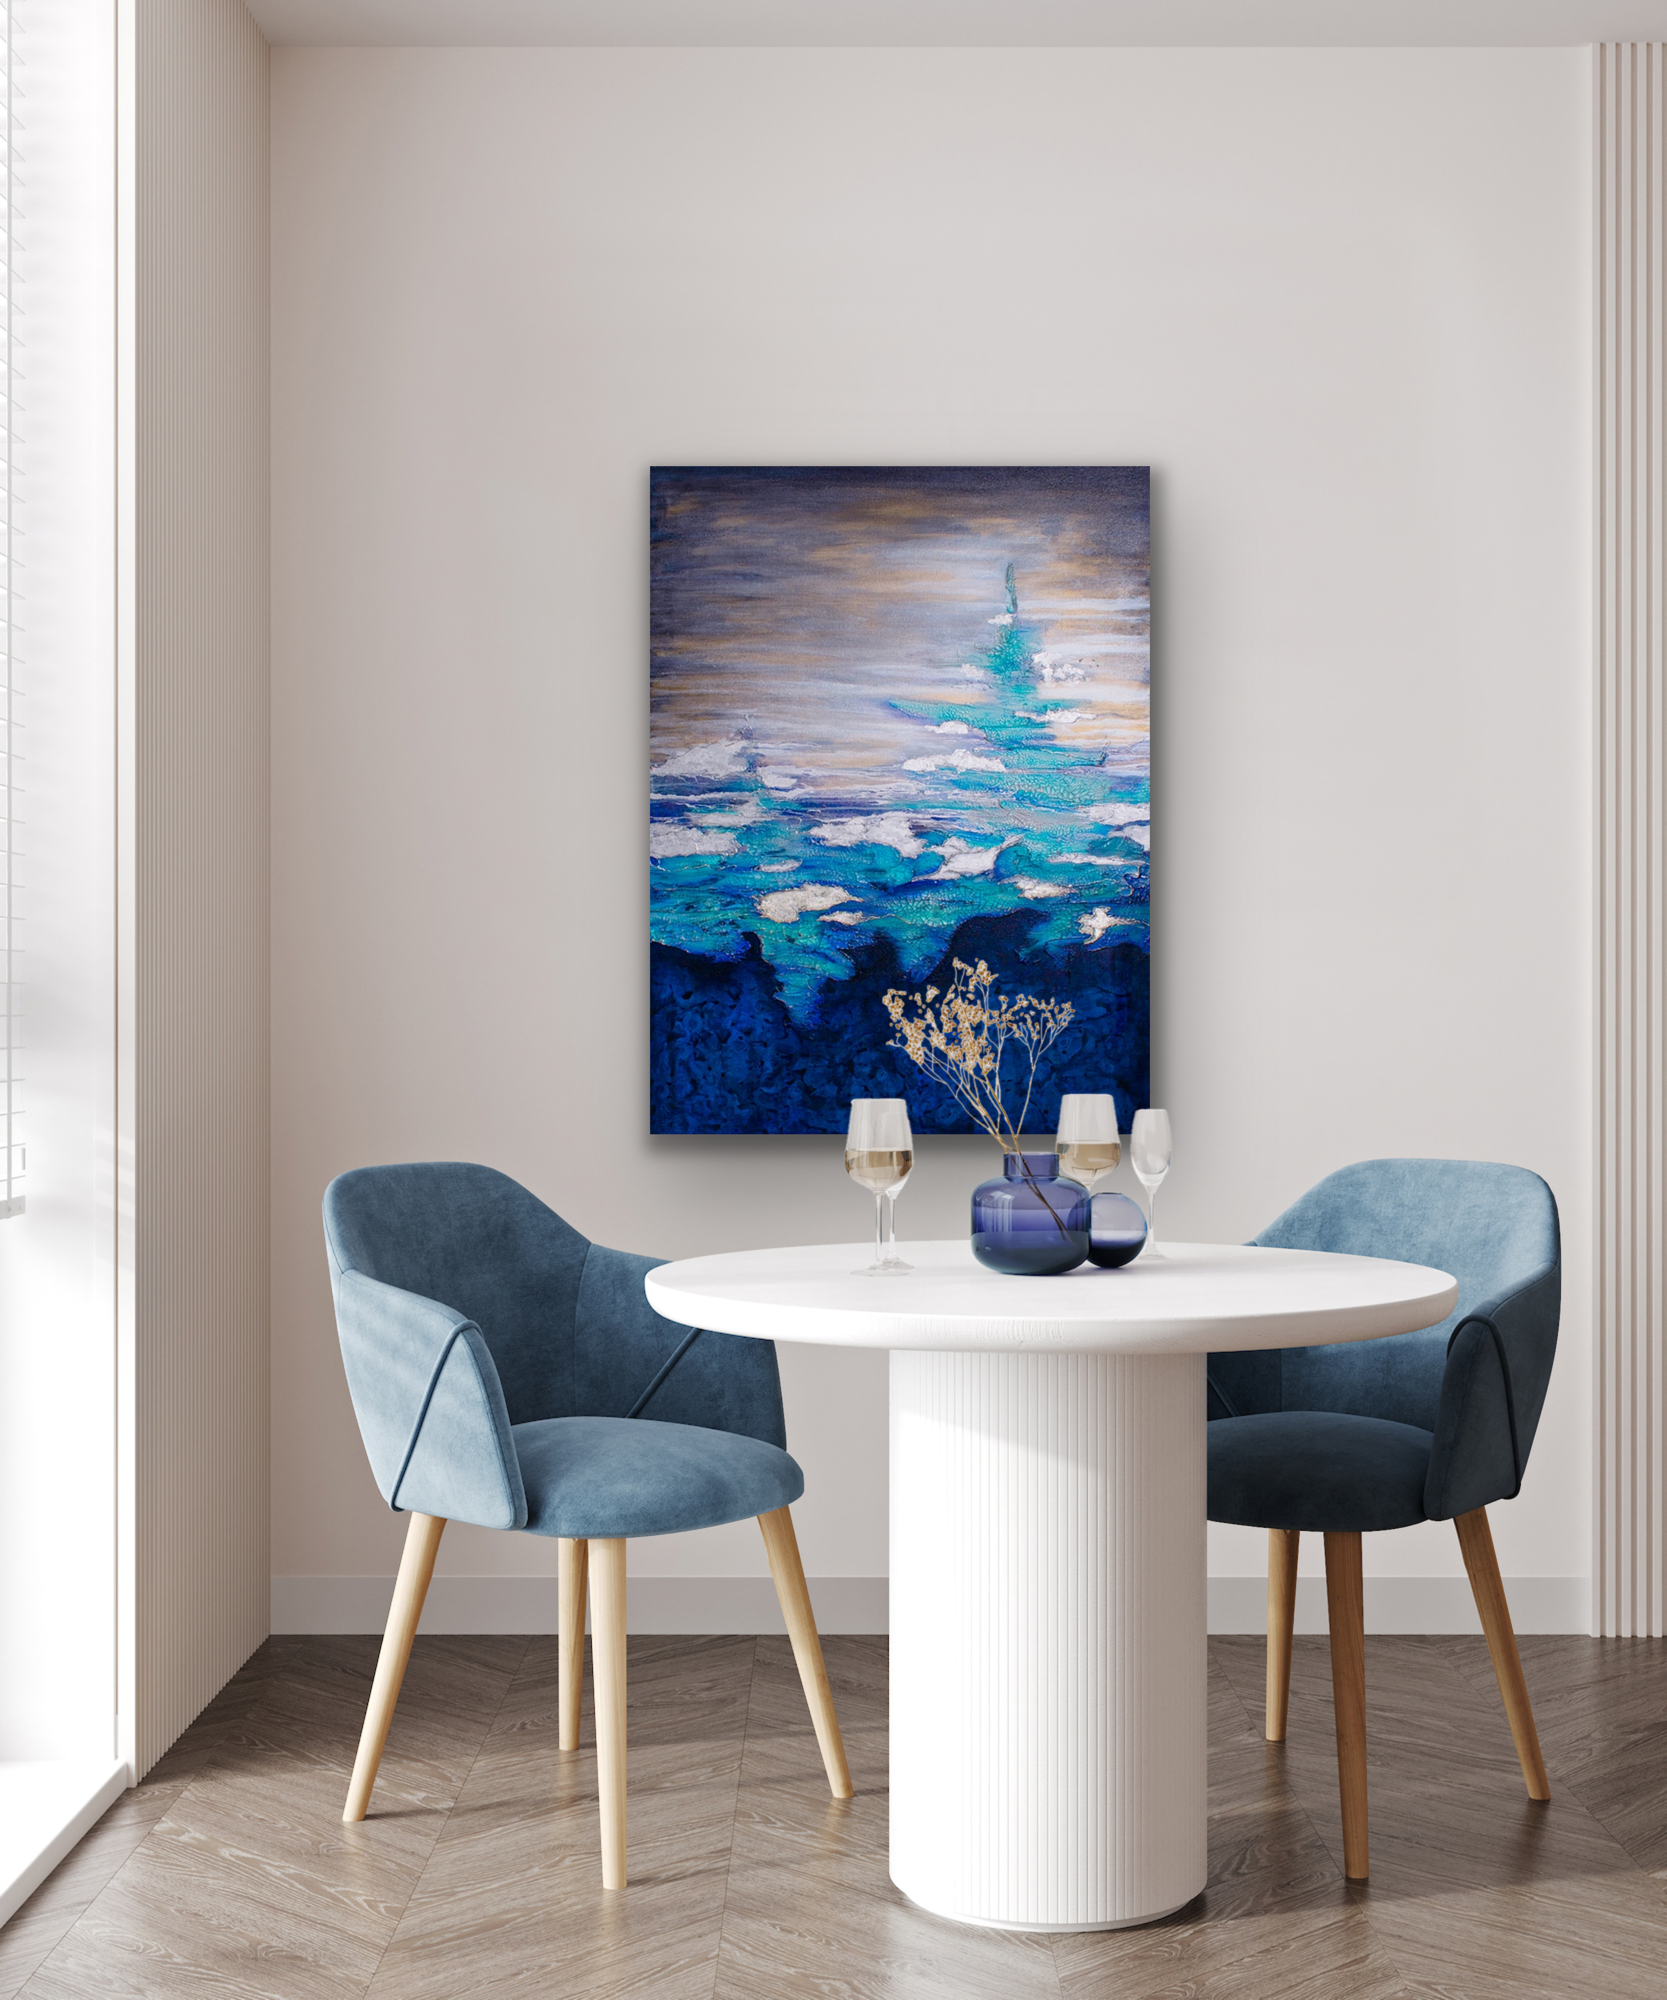 This work of art with its brilliant blues and soft greys and yellow will look great in your dining room, living room or hallway.